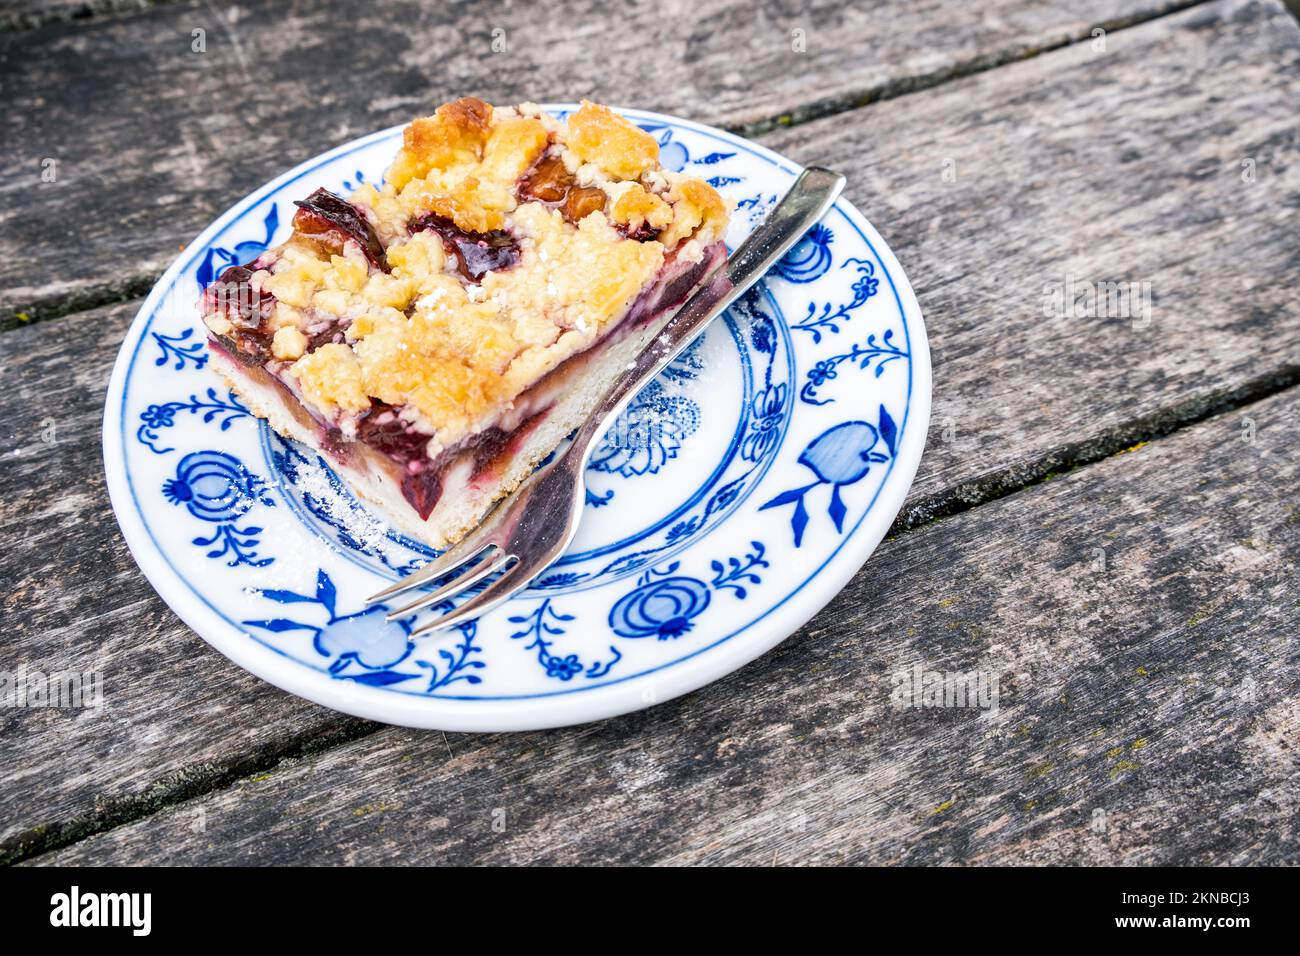 Overhead view of strudel cake on a wooden table outdoor. Bozen, Italy Stock Photo